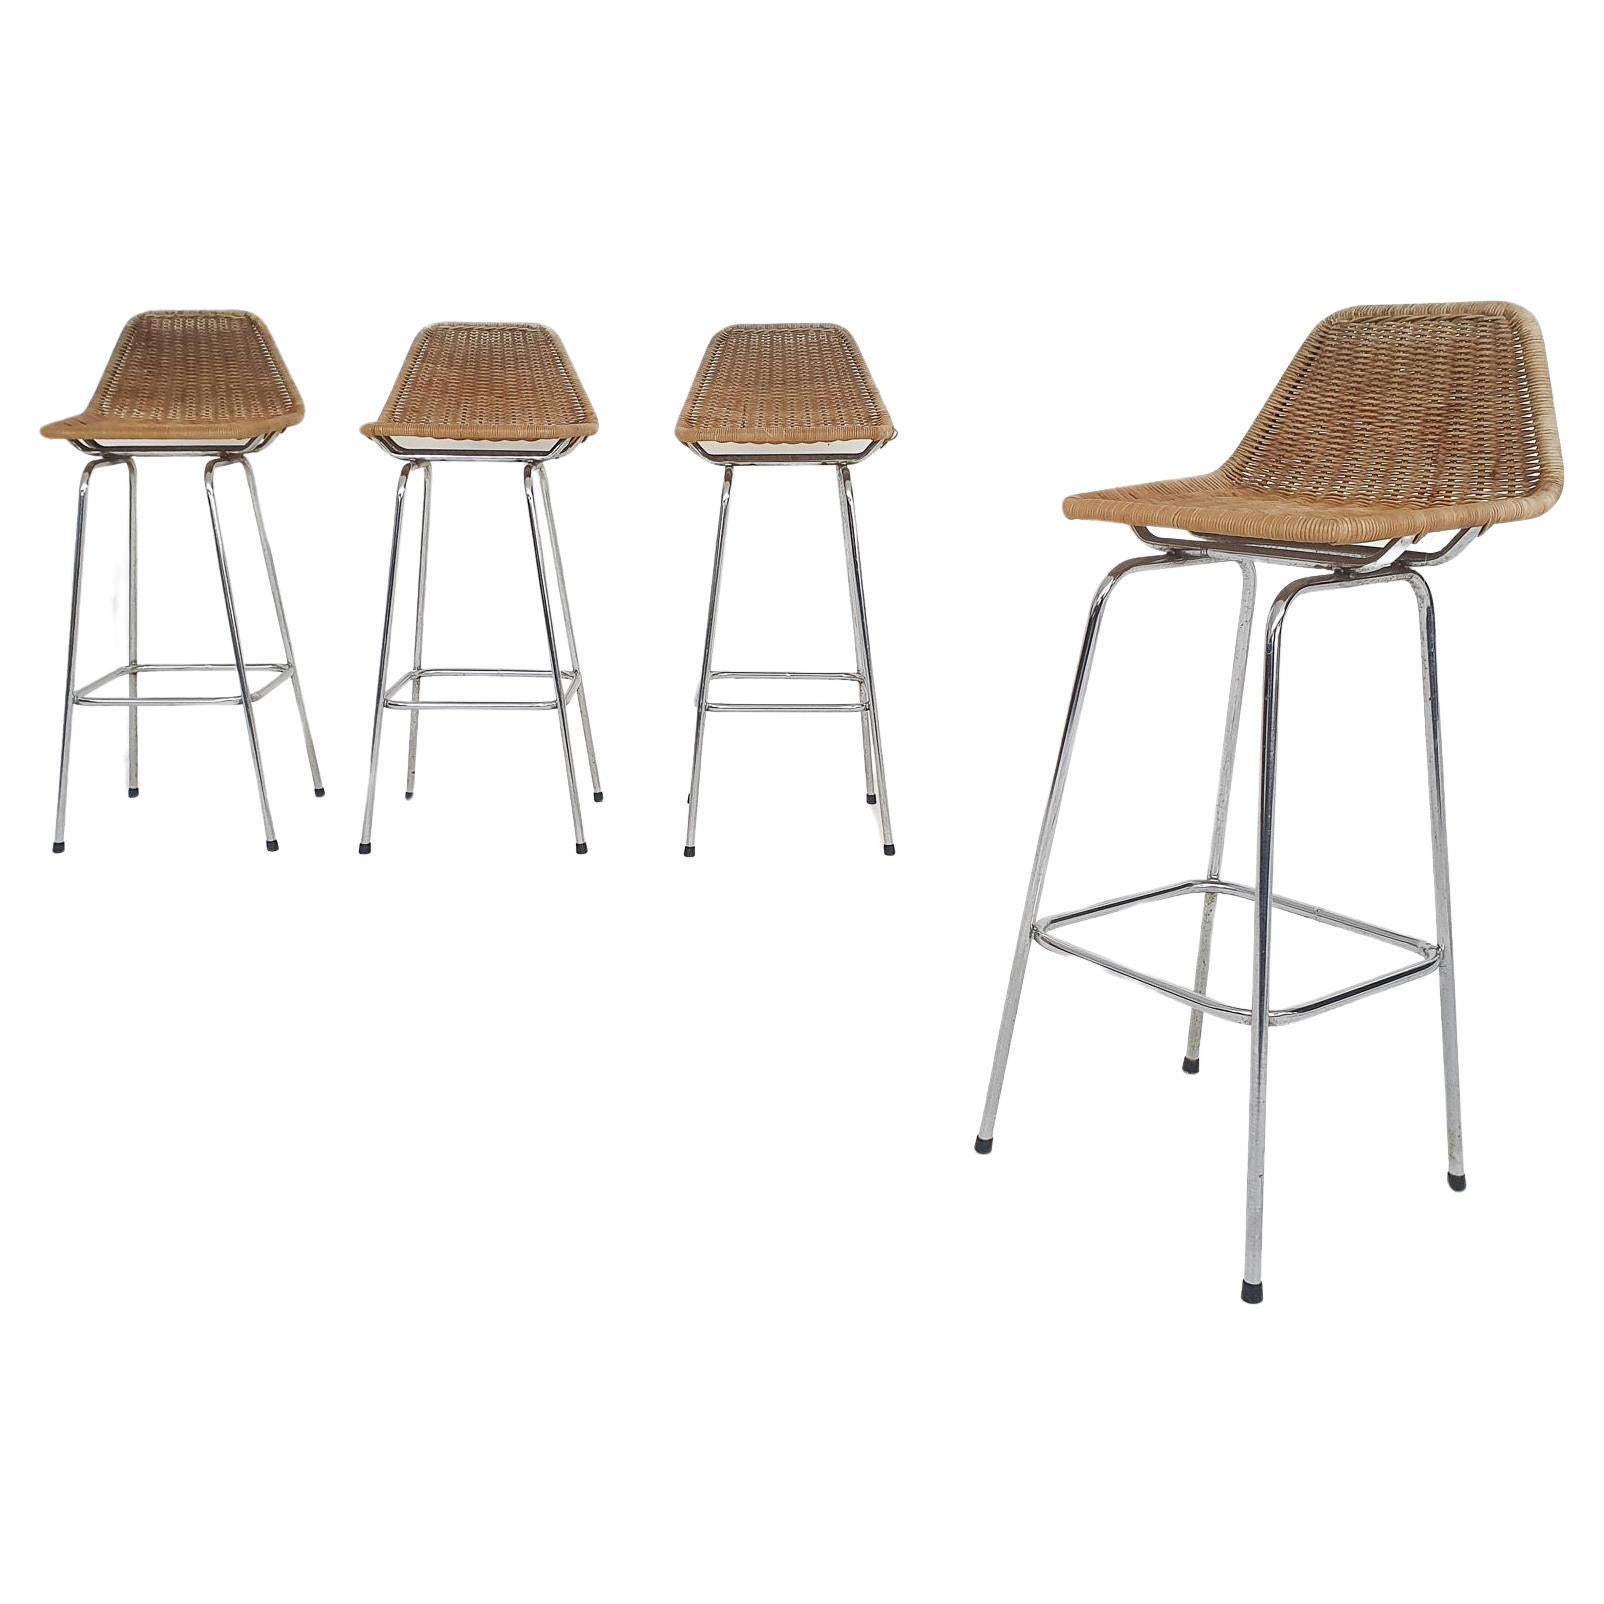 Set of four Rohe Noordwolde rattan and metal bar stools, The Netherlands 1950's